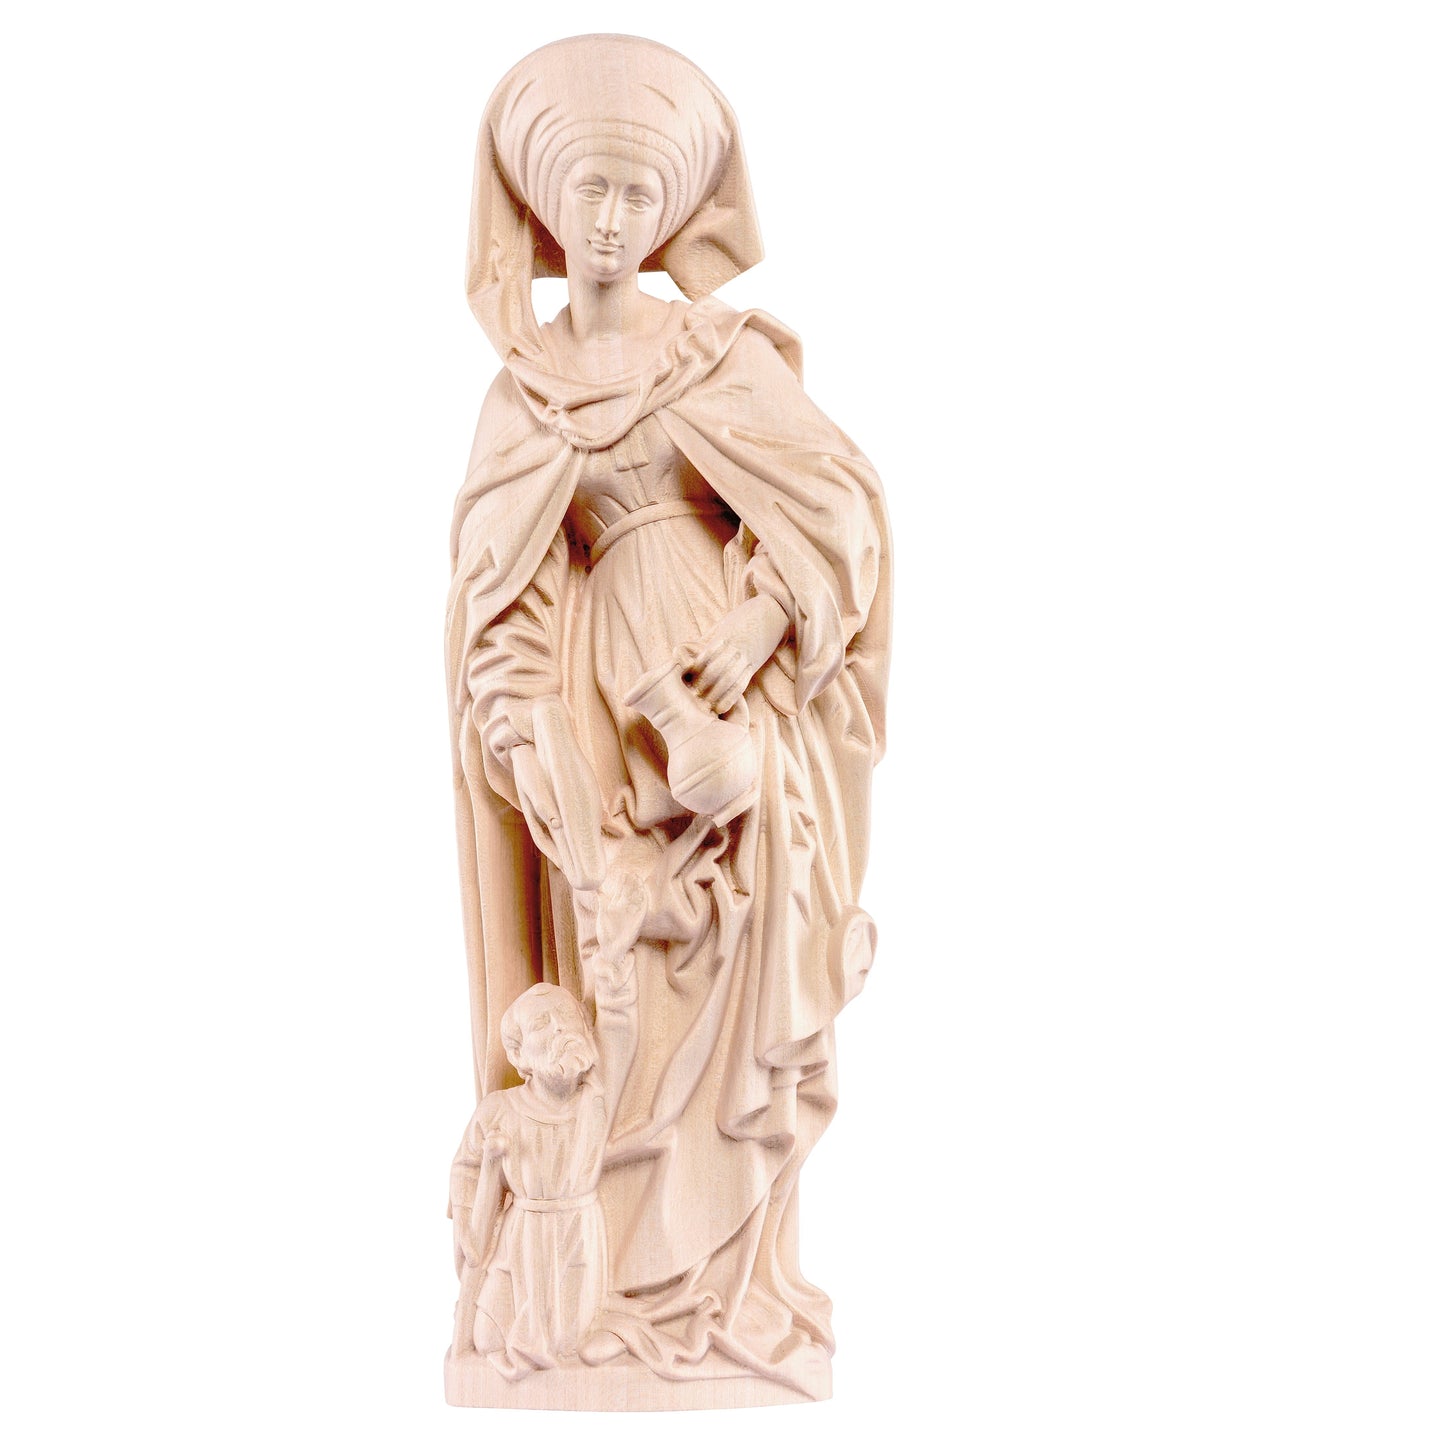 Mondo Cattolico Natural / 40 cm (15.7 in) Wooden statue of St. Elizabeth with beggar